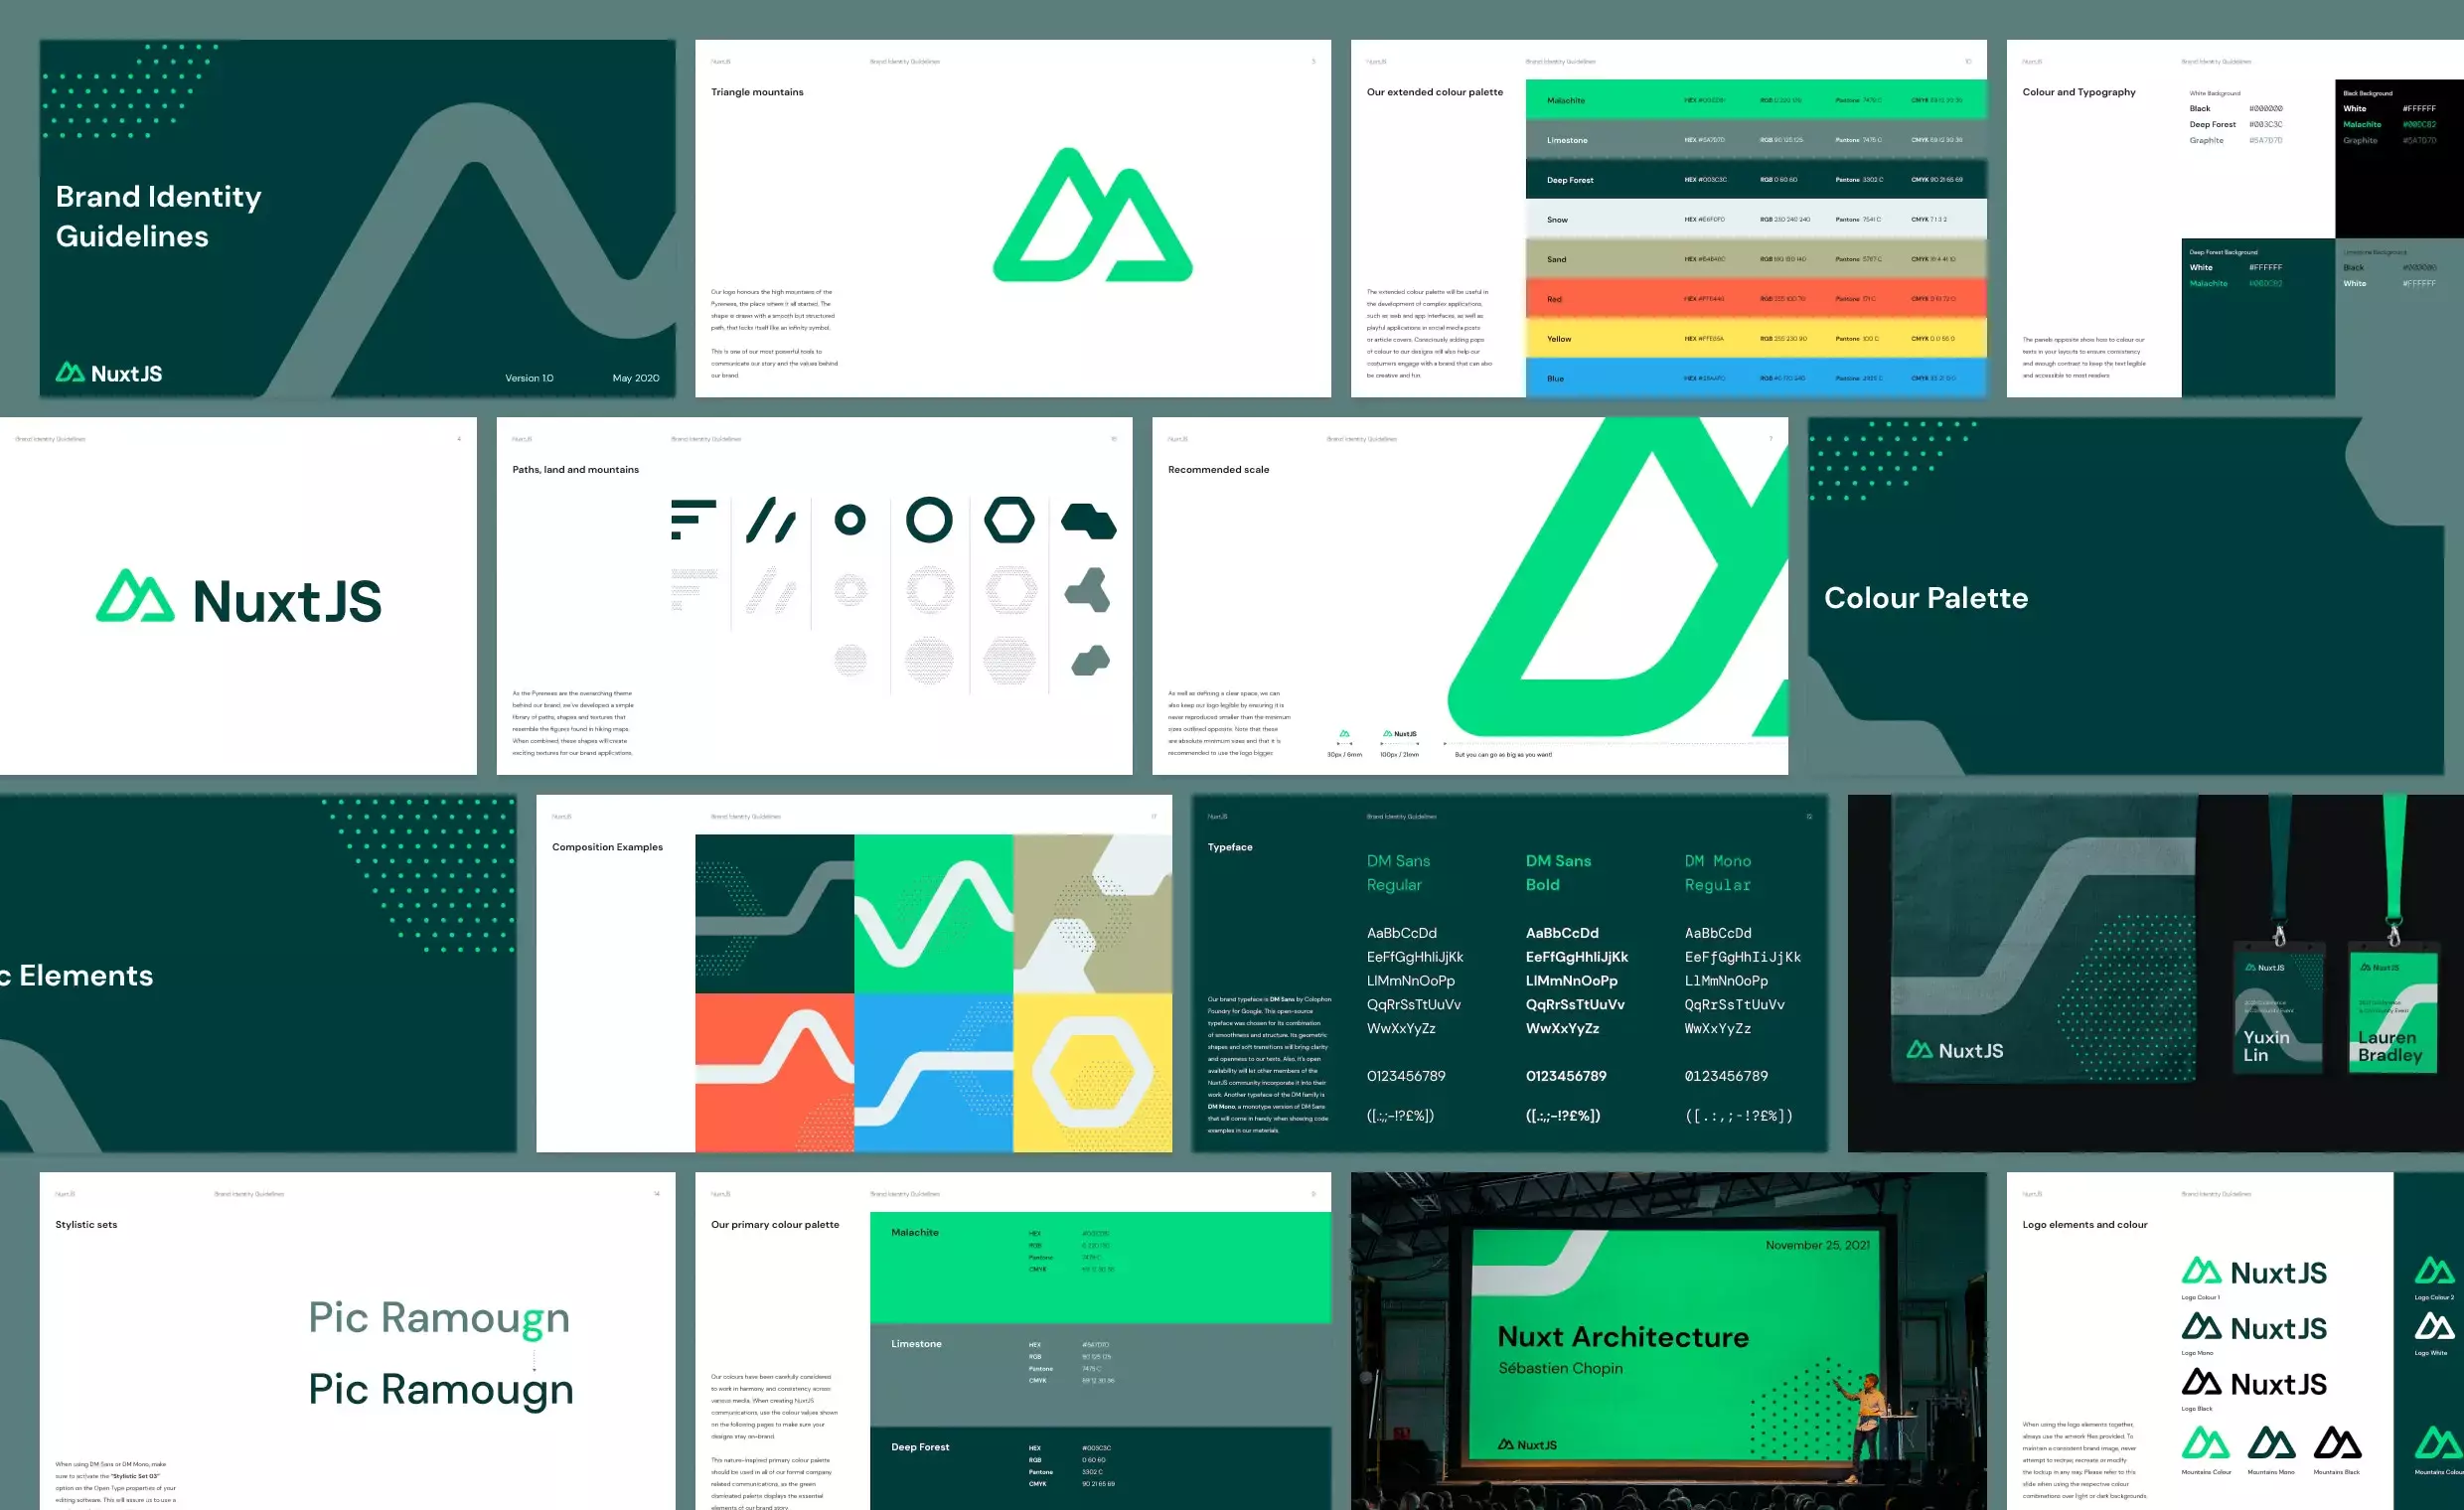 NuxtJS Brand identity guidelines by BB Agency